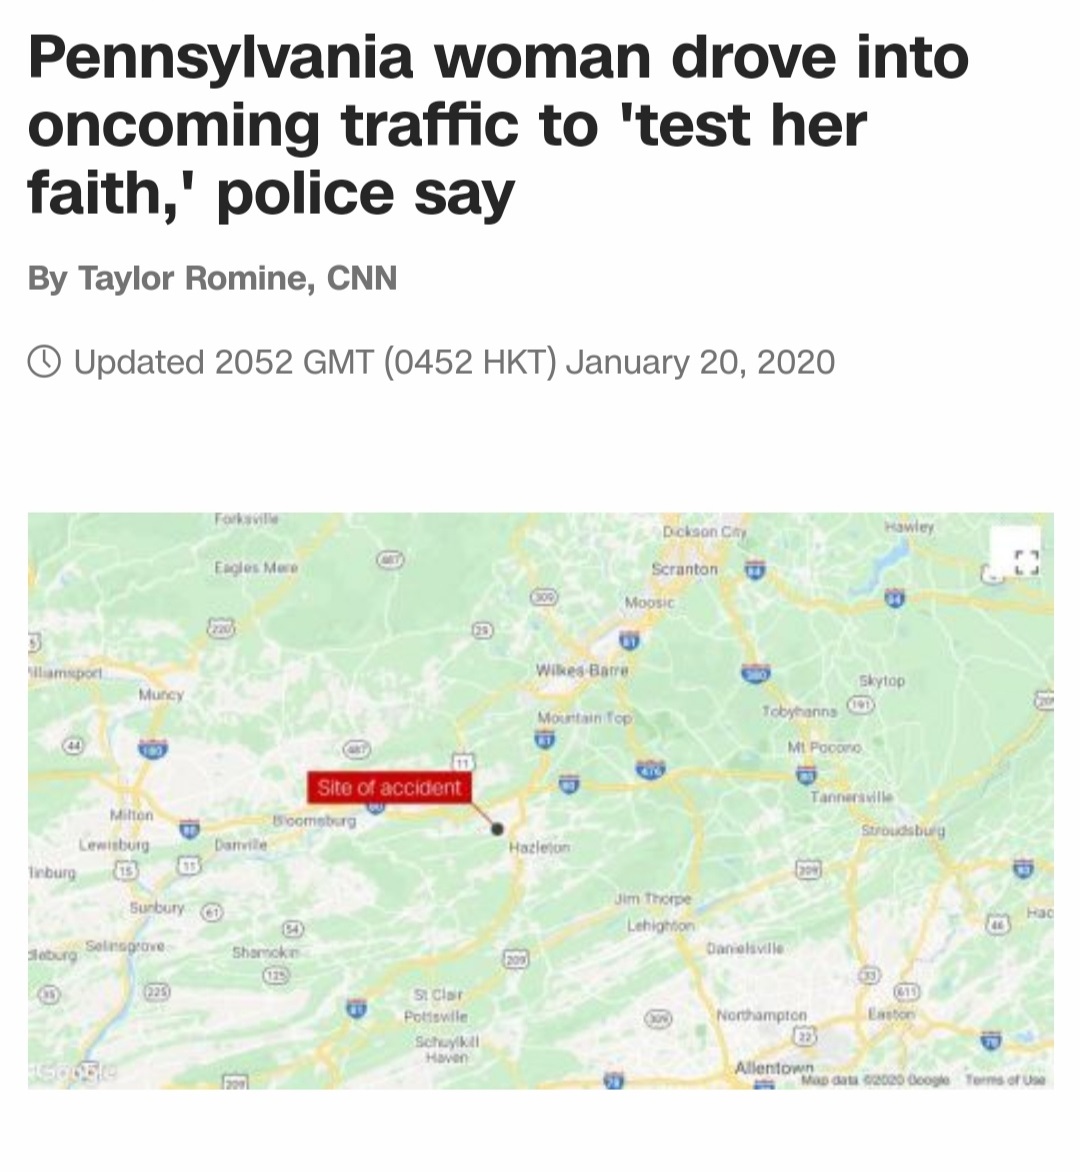 geert hofstede - Pennsylvania woman drove into oncoming traffic to 'test her faith,' police say By Taylor Romine, Cnn Updated 2052 Gmt 0452 Hkt Dickson City Eagles Mere Scranton Moosid lampoc Wikes Barre Skytop Tobyanns Ml Pocond Tanner Milton Site of acc